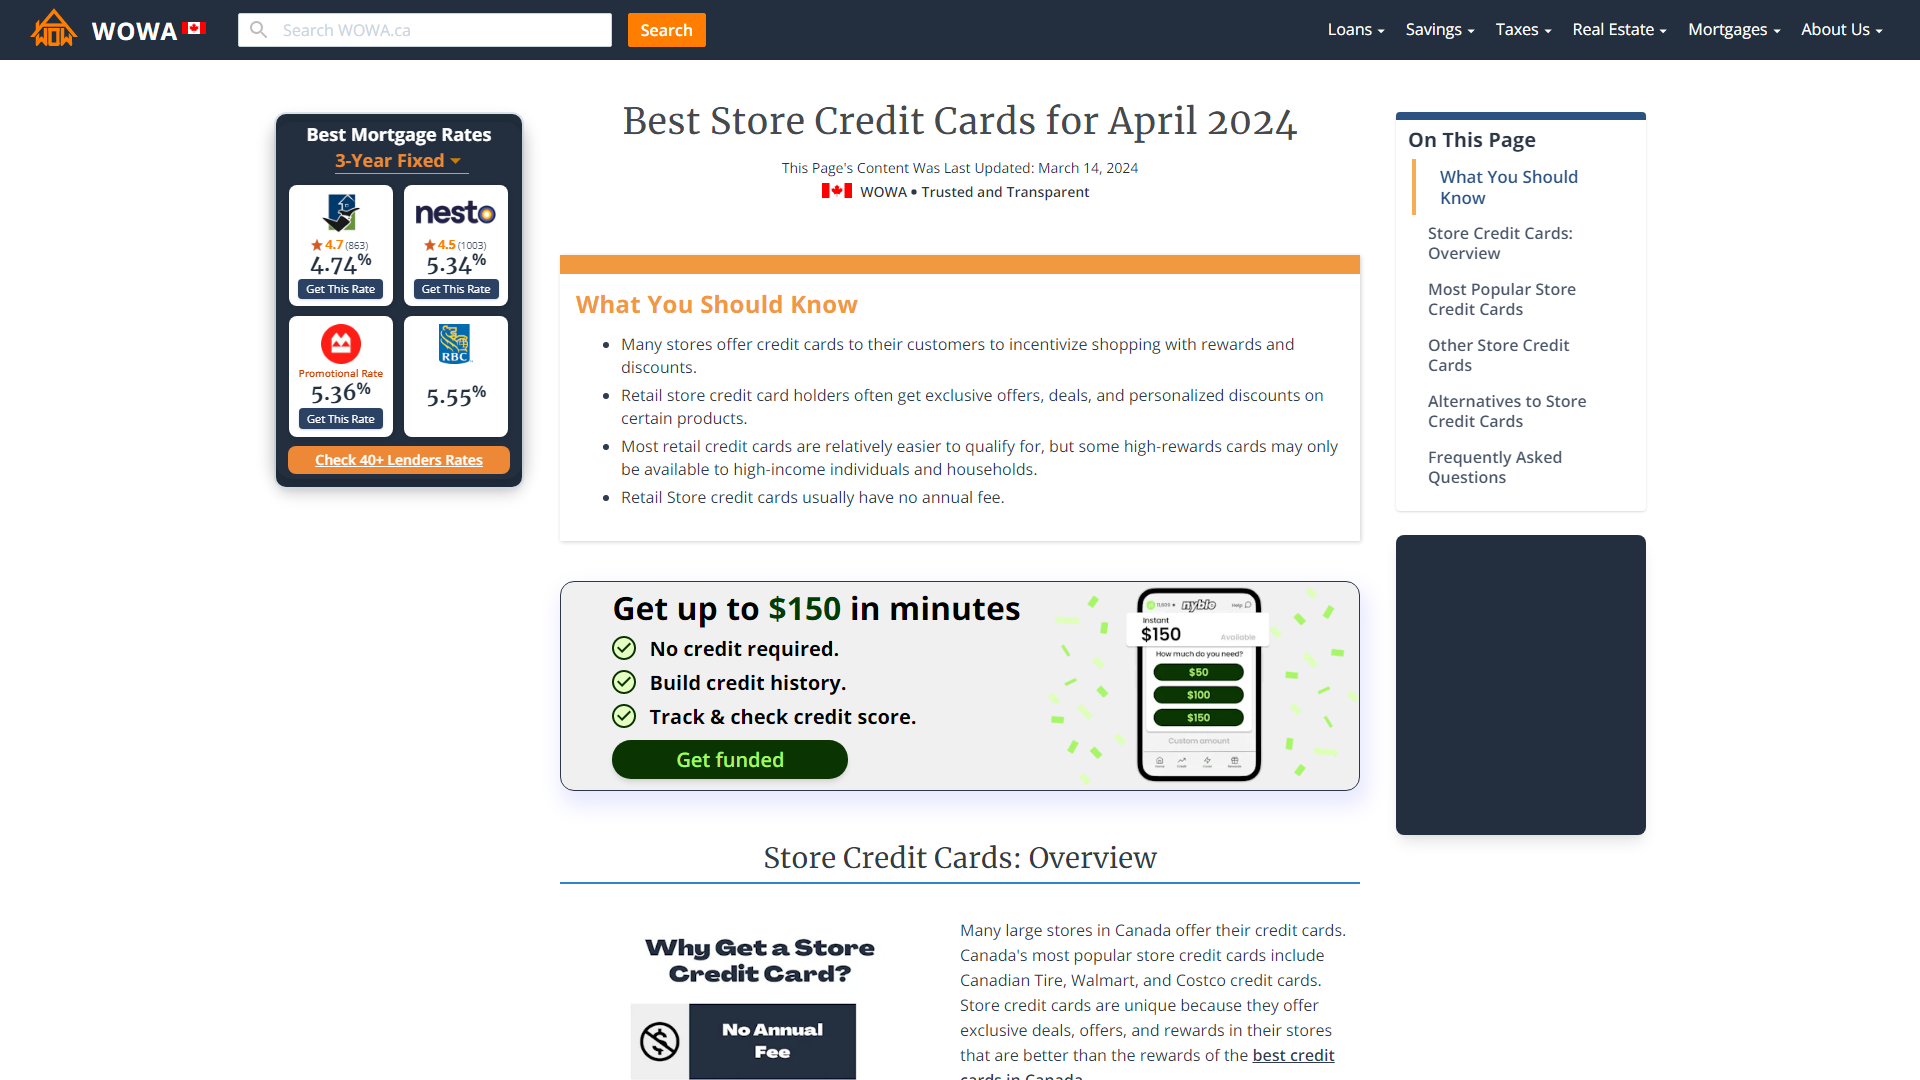 Easiest Store Credit Cards to Get